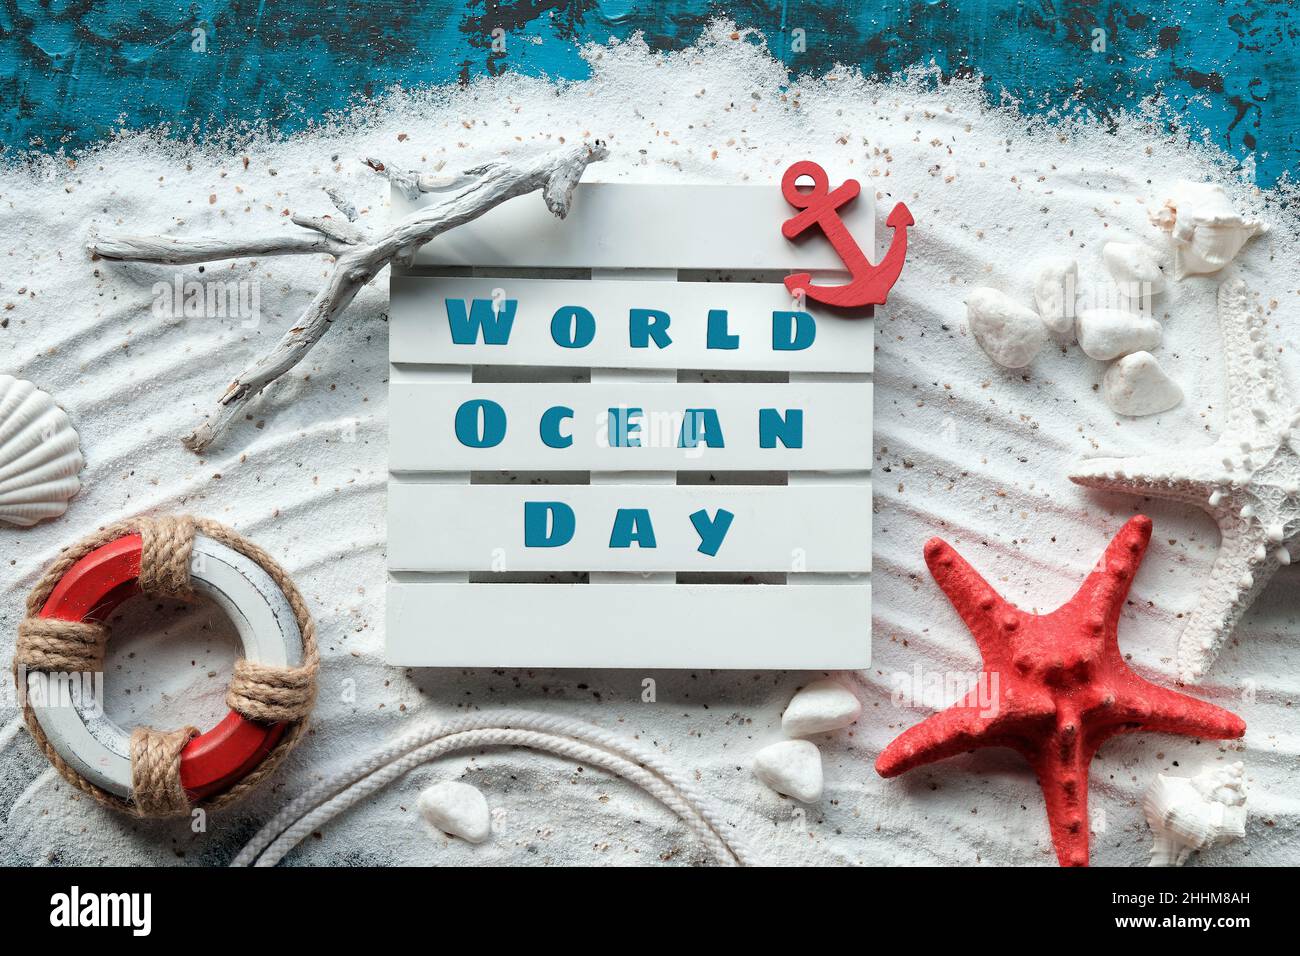 World Oceans Day text. Background with white sand on turquoise blue. Shells, red starfish, anchor. Stock Photo